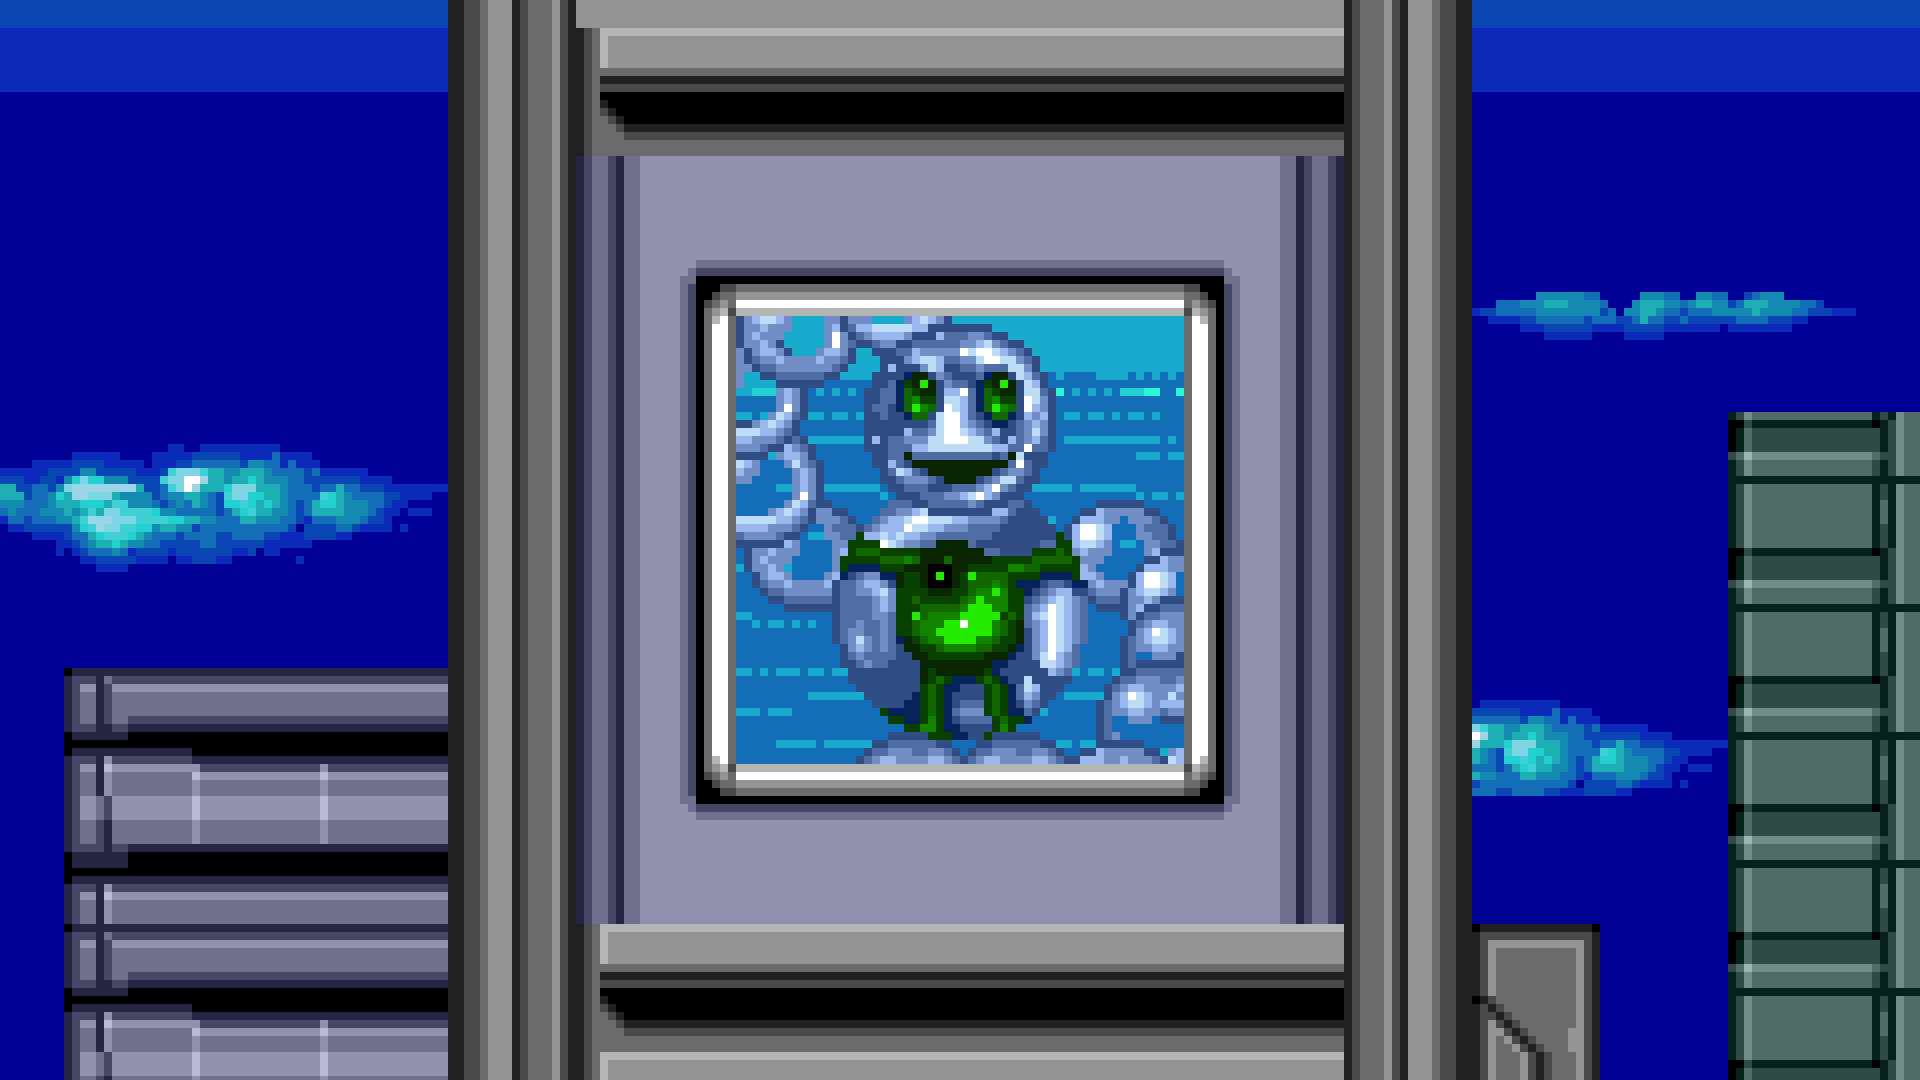 Fought the Bubble Bot